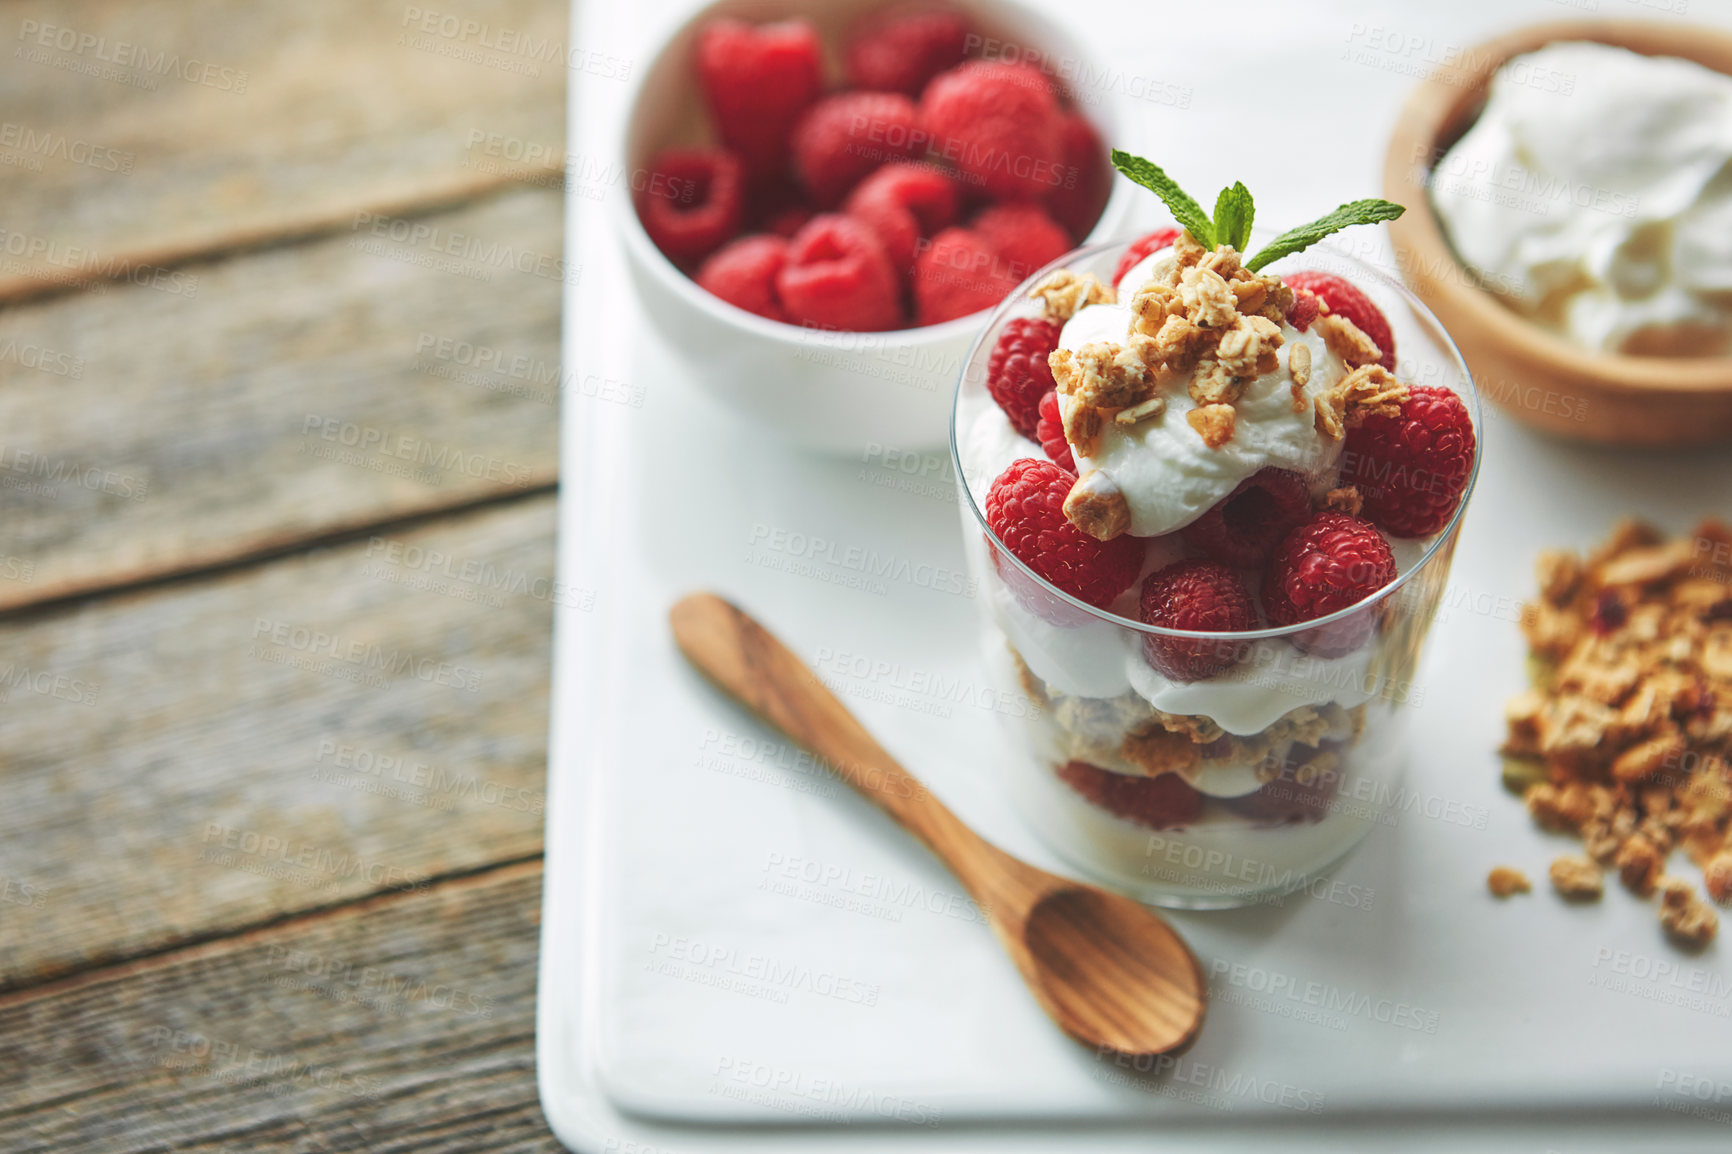 Buy stock photo Shot of of granola, yoghurt and berries in a glass and on a plate